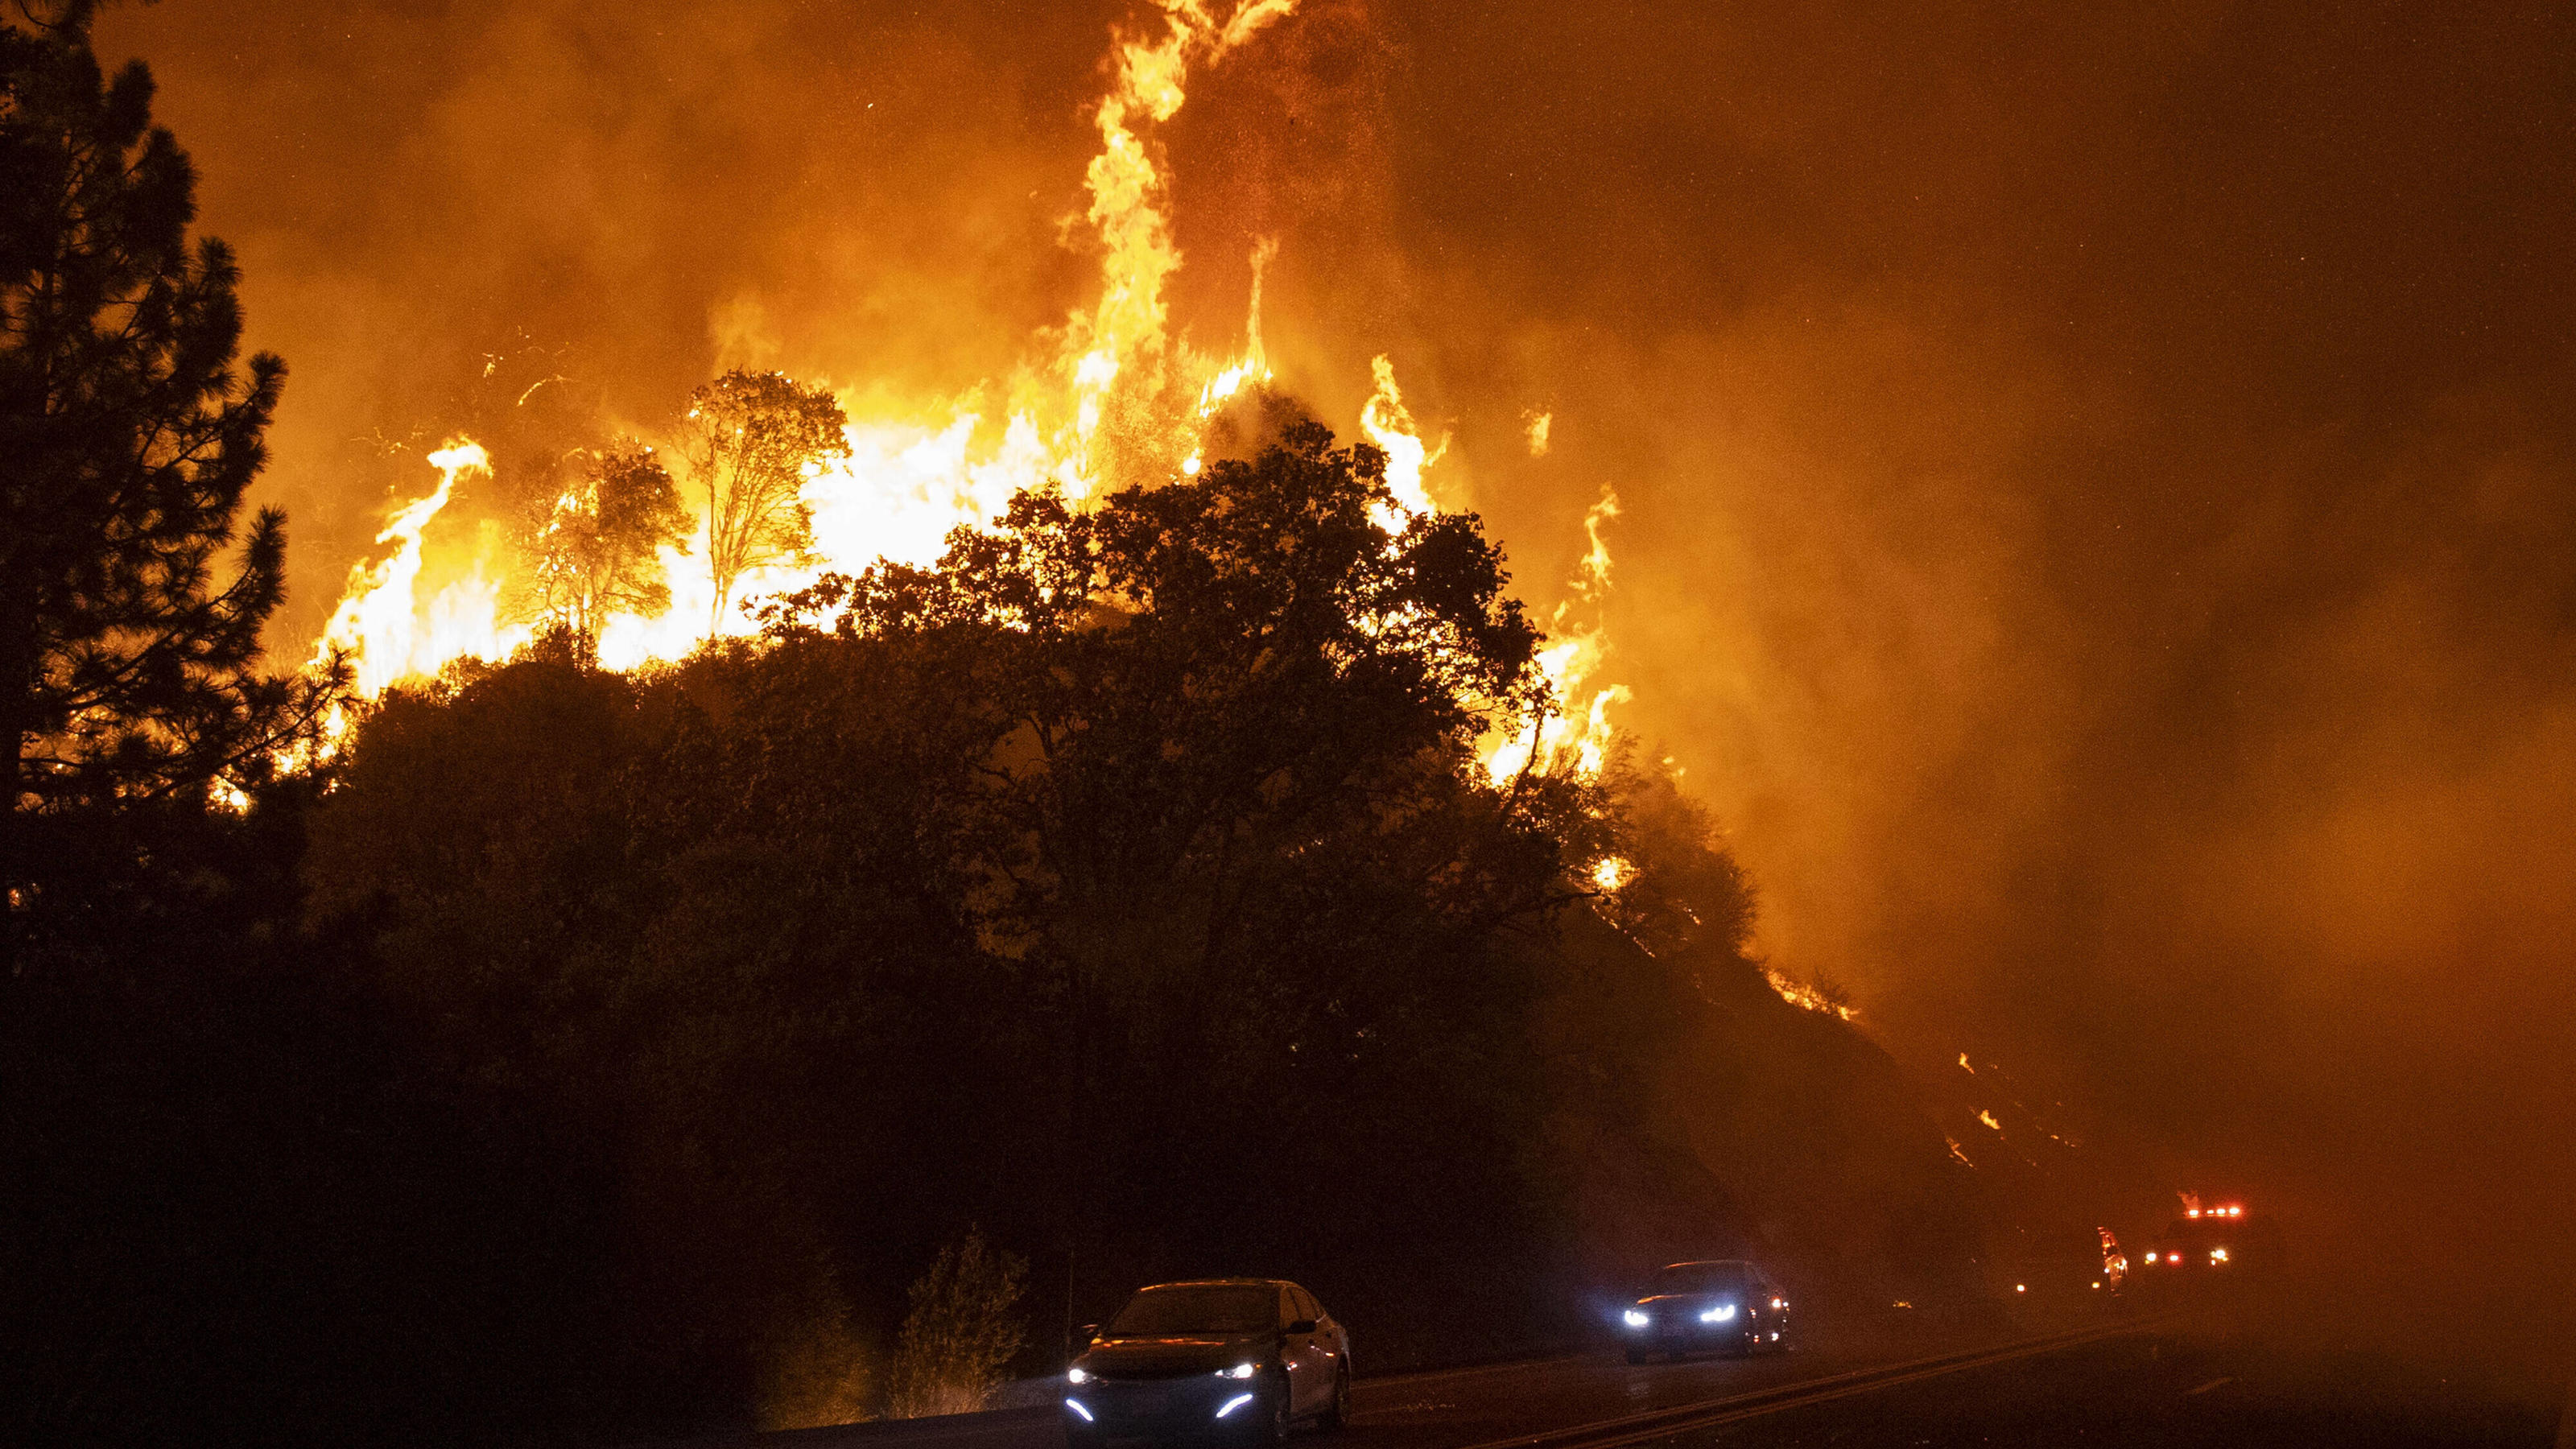  High winds blow embers and flames across Hwy 168 as the Creek Fire rapidly expands on September 8, 2020 near Shaver Lake, California. California Gov. Gavin Newsom declared a state of emergency in five California counties late yesterday as record hea